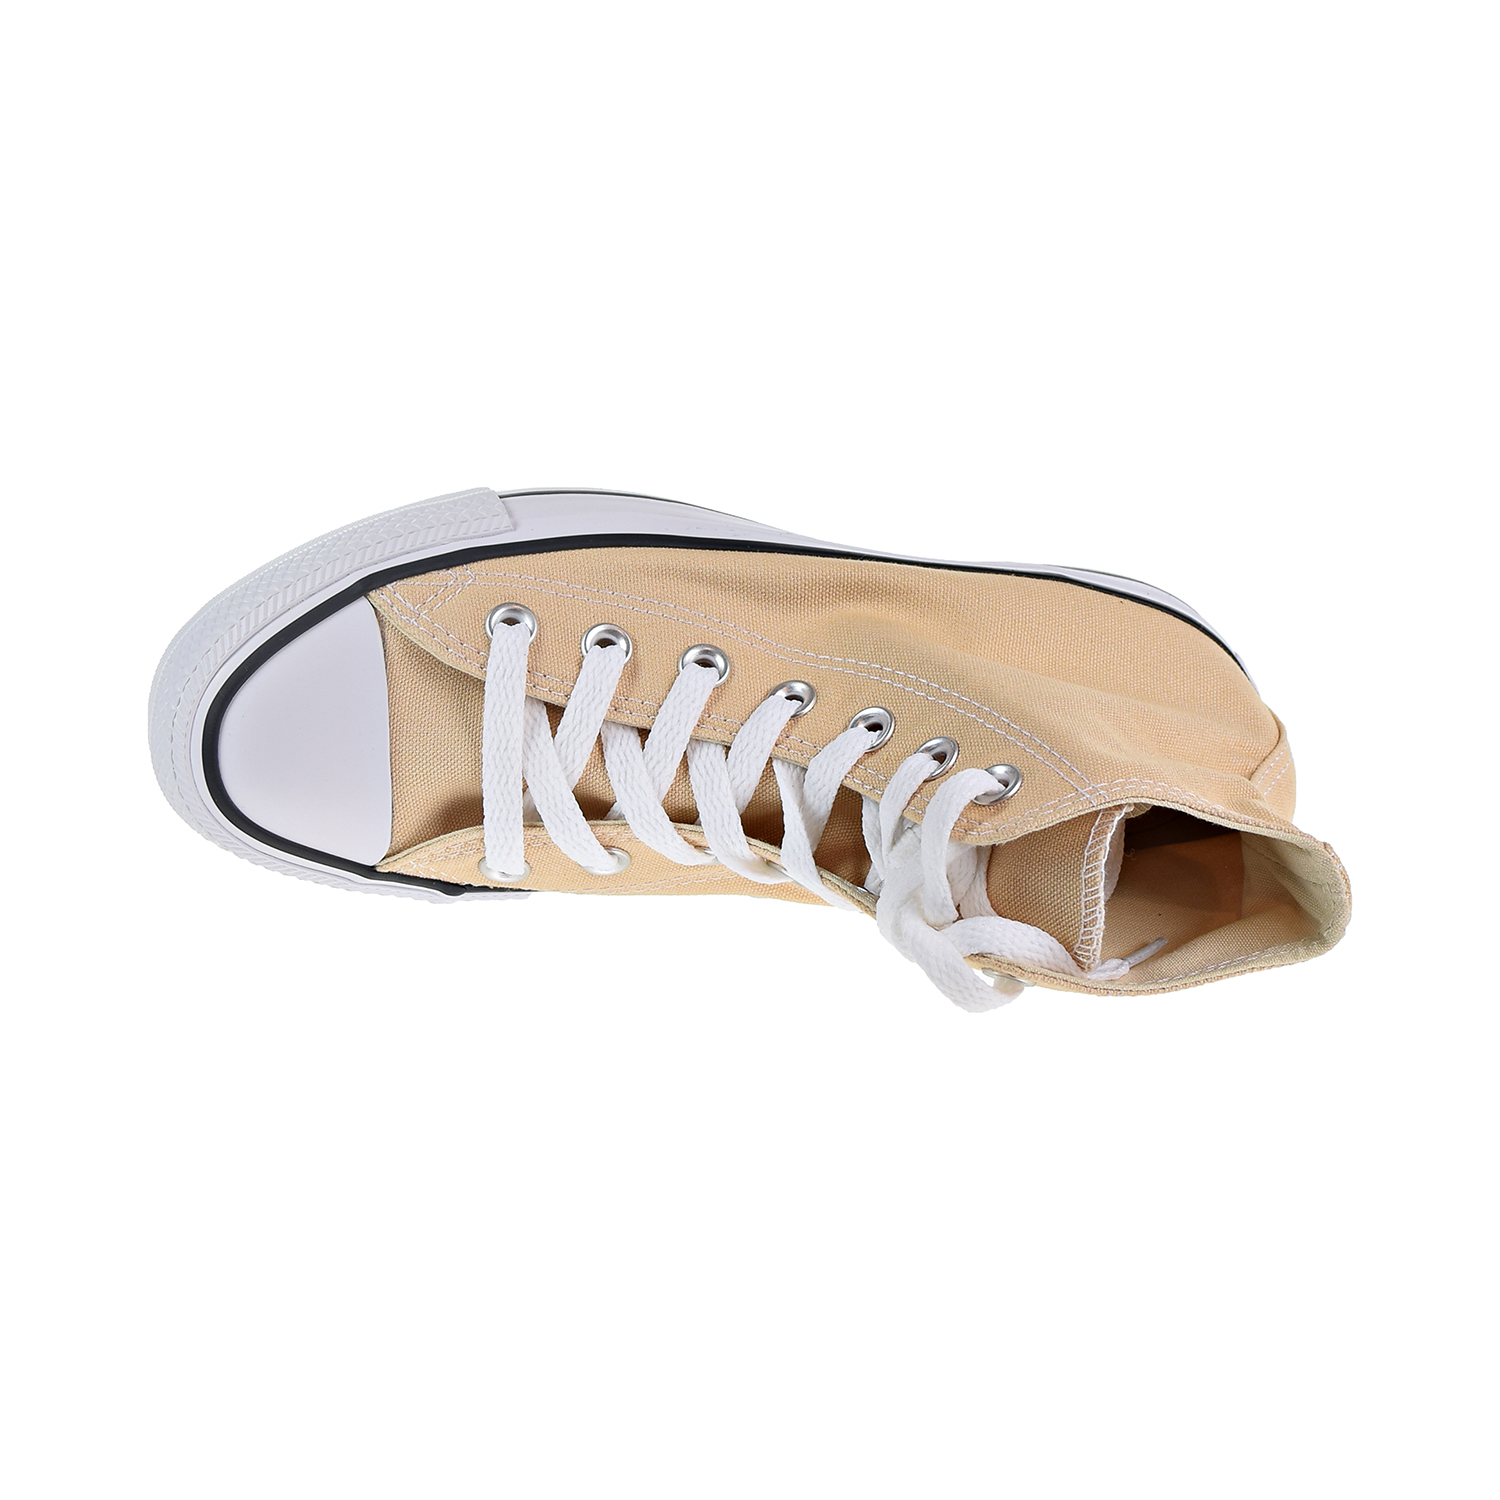 Converse Chuck Taylor All Star Hi Men's/Big Kids' Shoes Raw Ginger 160456f - image 5 of 6